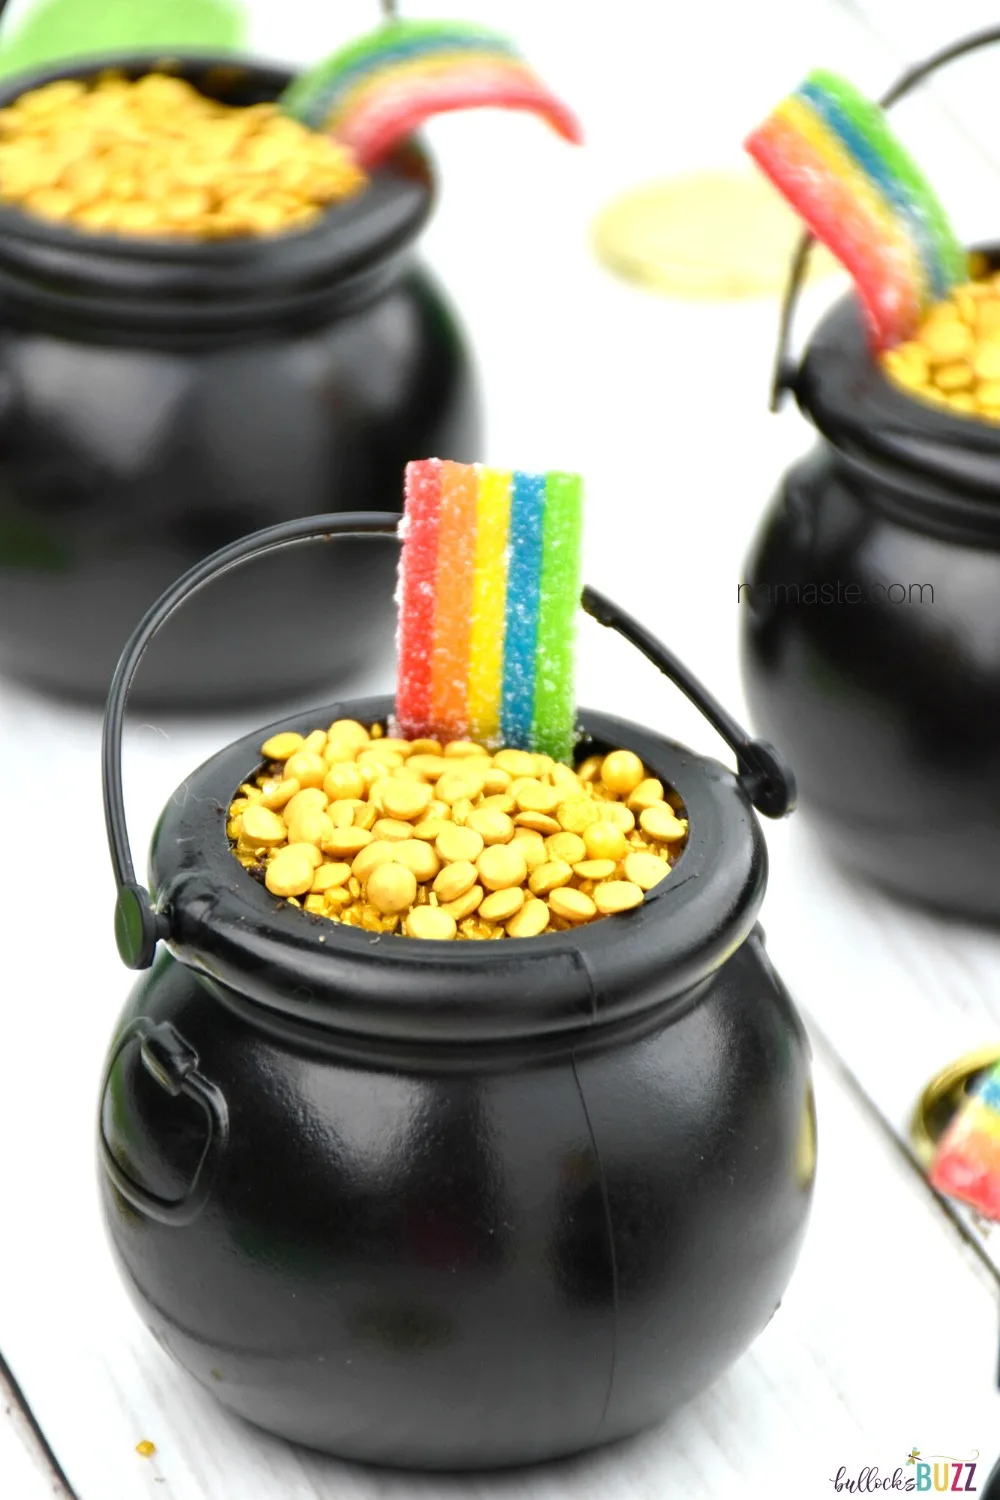 Layers of rich, chocolatey cookies and creamy chocolate pudding, topped with gold sprinkles, and sour rainbow candy make these St. Patrick's Day Pot of Gold Dirt Cups taste as good as they look! #recipes #StPatricksDay #bullocksbuzz